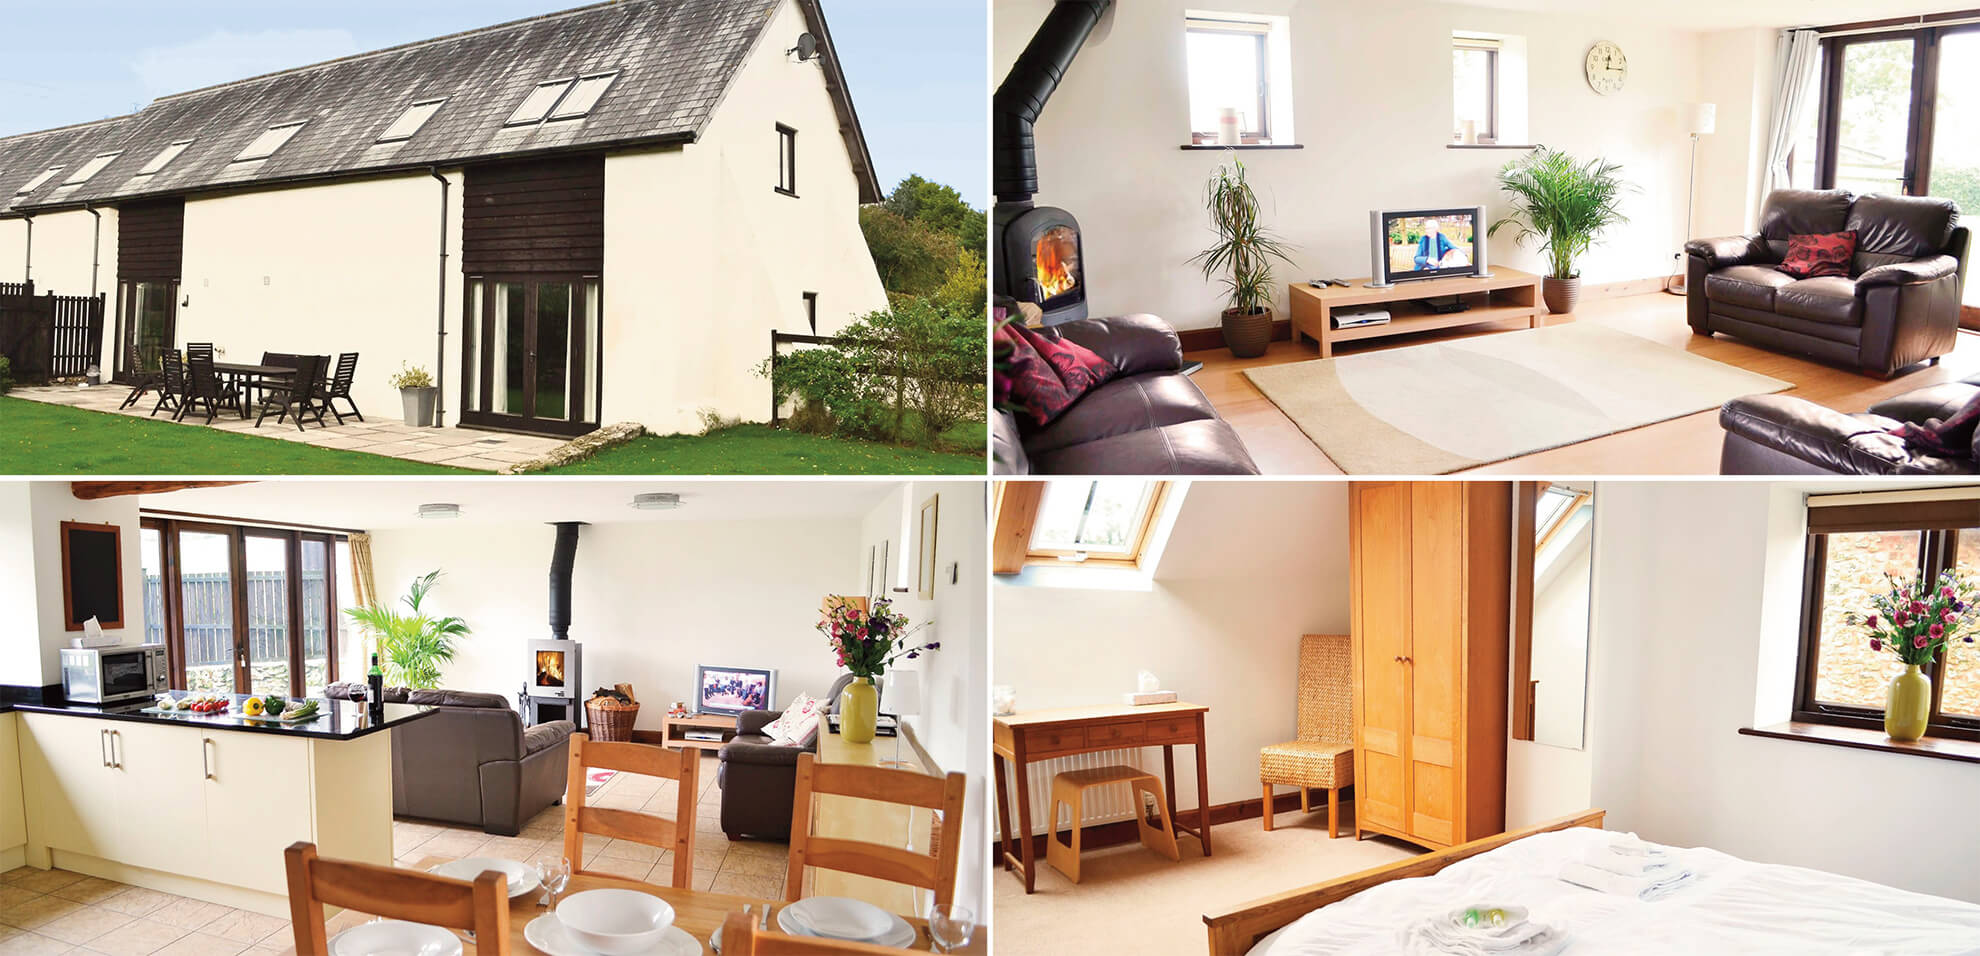 Eco-friendly holiday homes: Campion Lodge and Woodbell Lodge, Wakes Colne, Essex